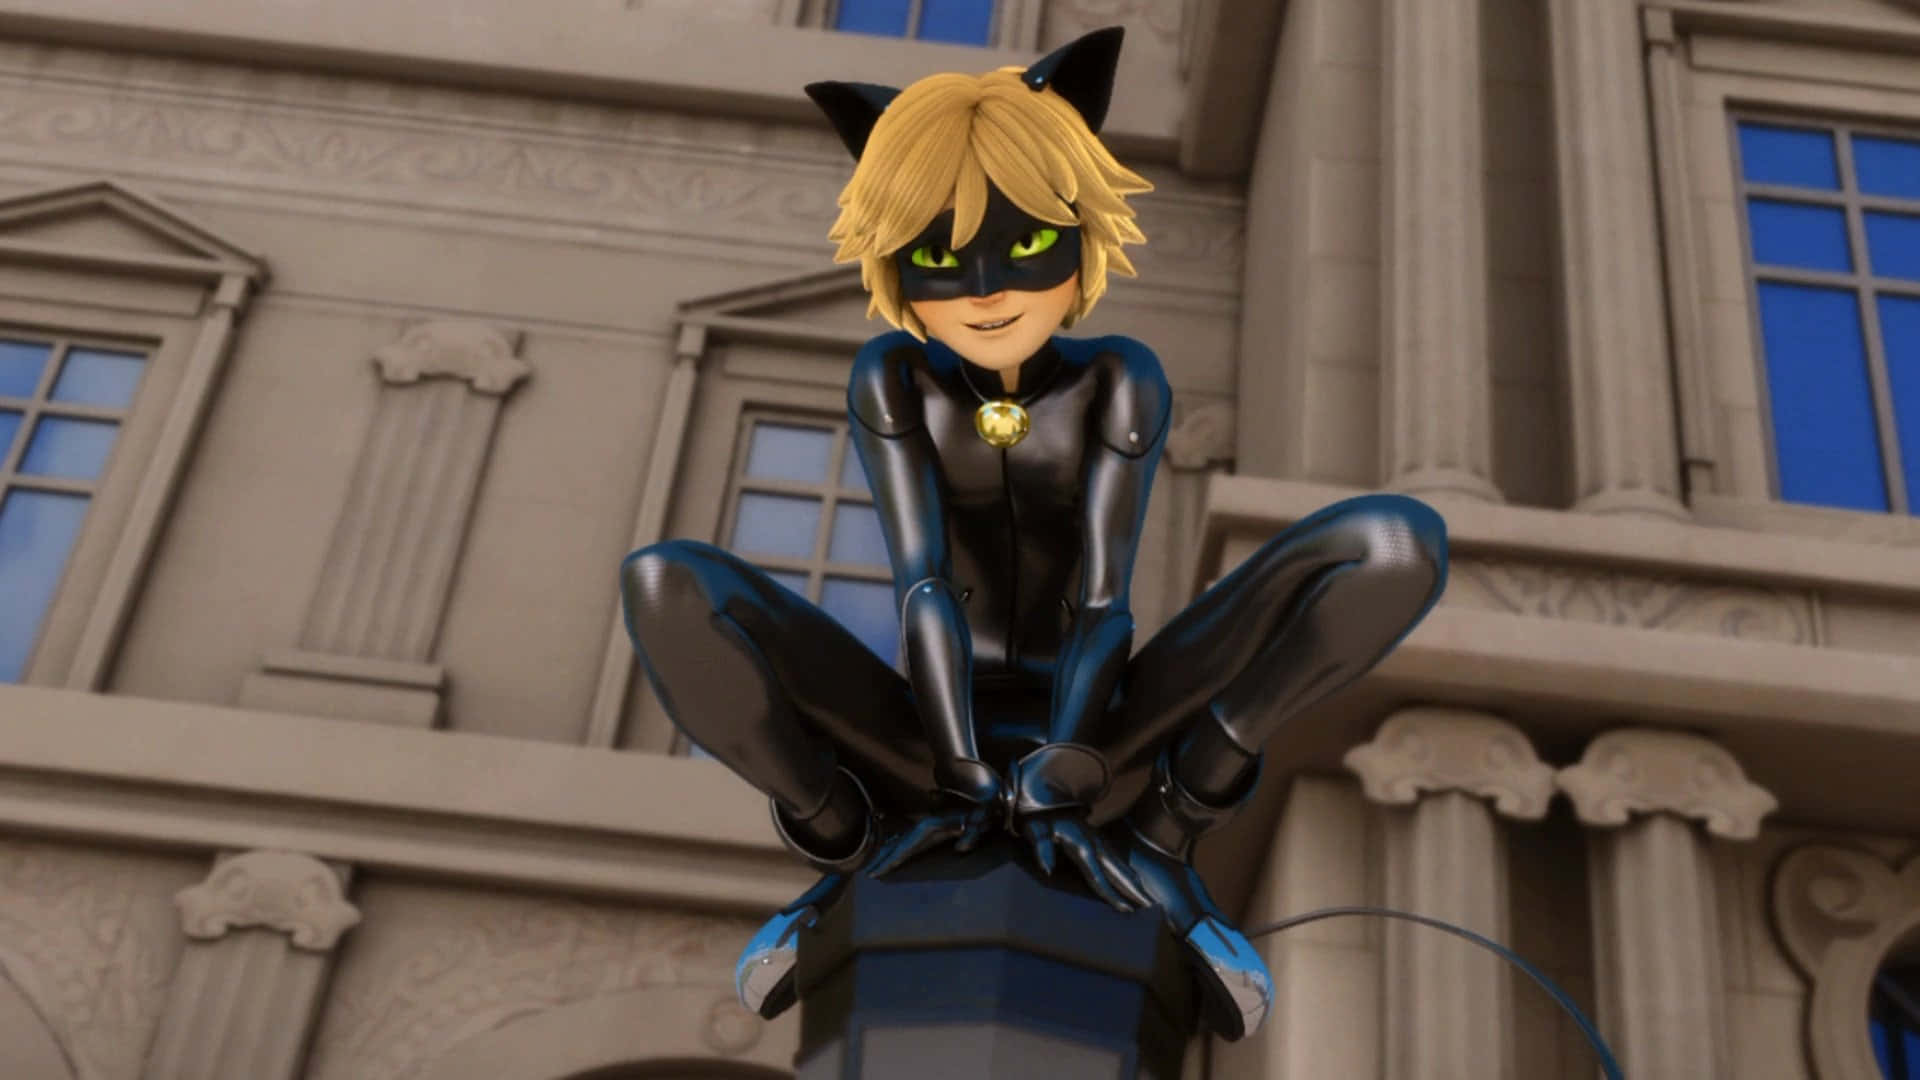 Cat Noir protecting the city